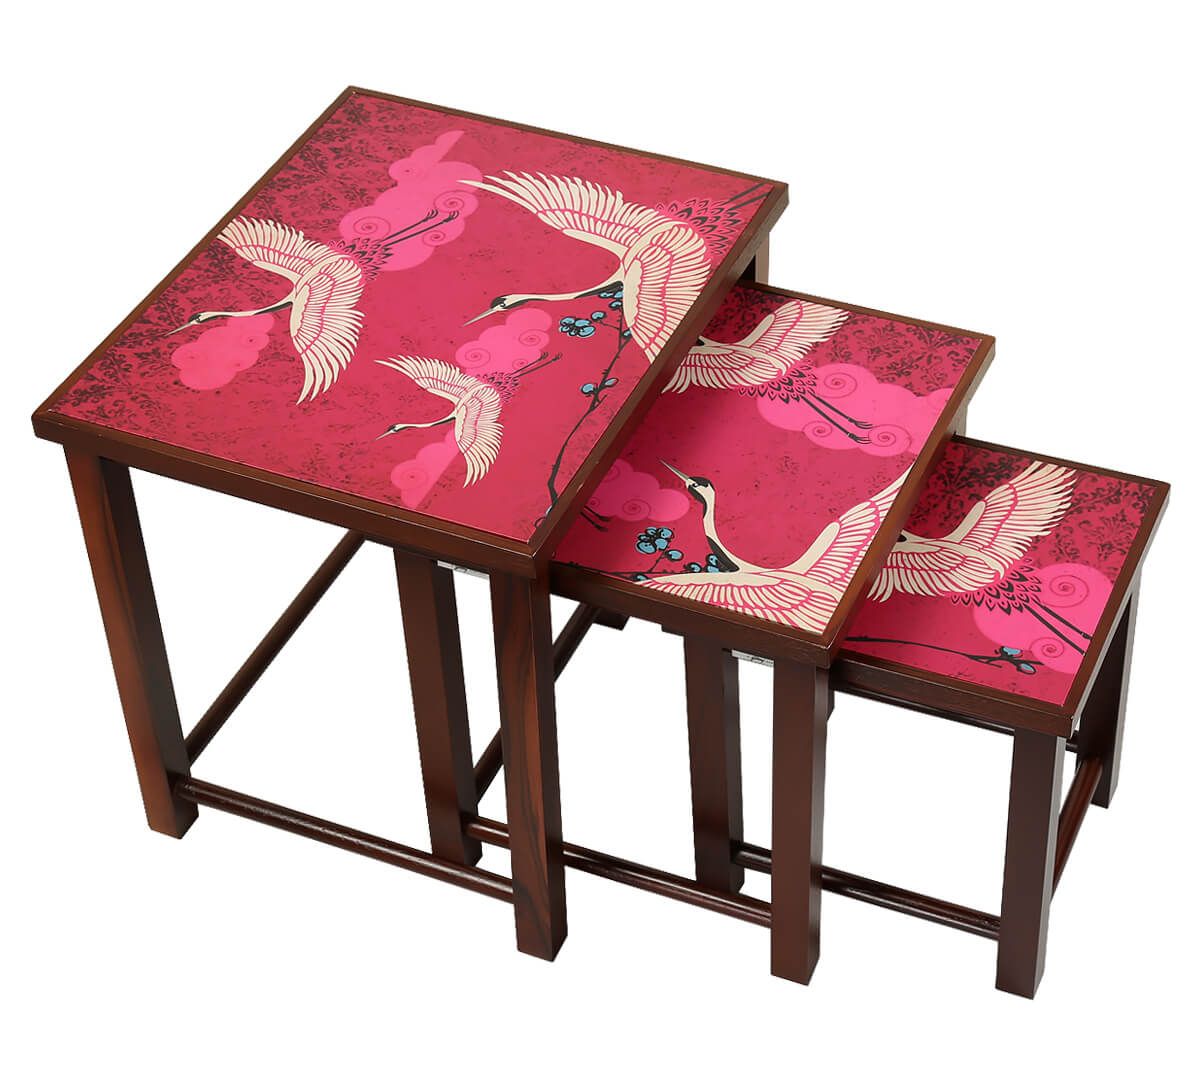 India Circus Legend of the Cranes Nested Table